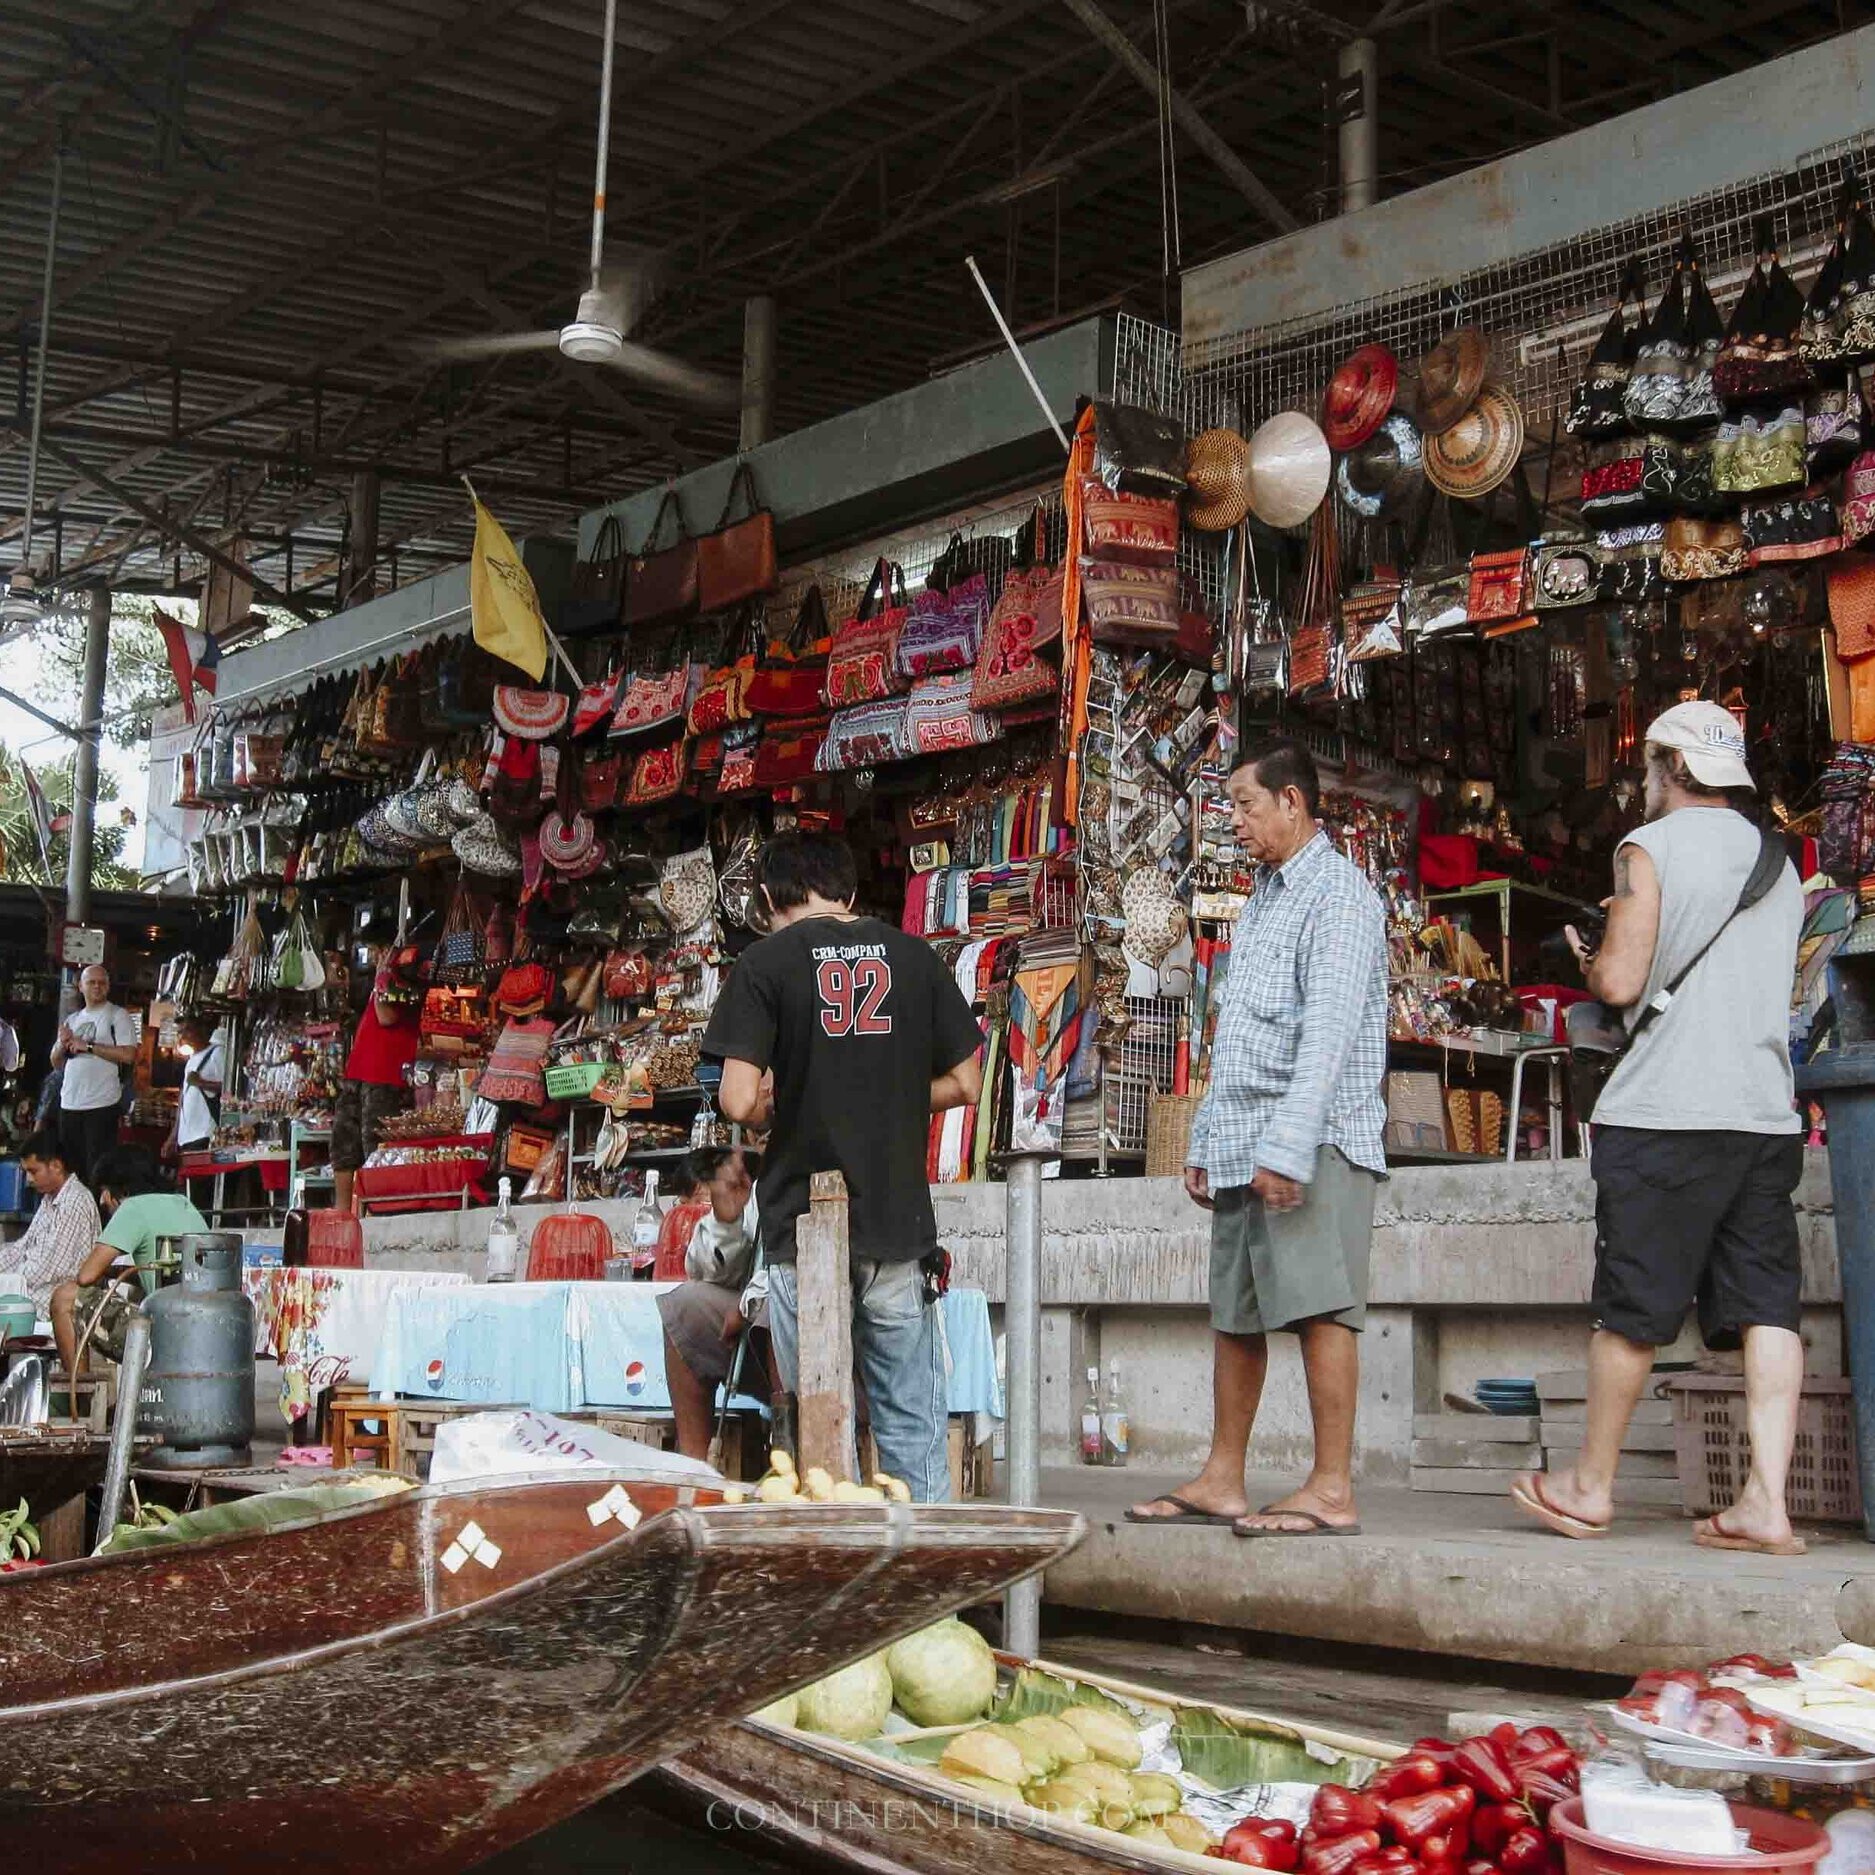 People buying vegetable and goods at a floating market - Things to do on your 7 days in thailand itinerary